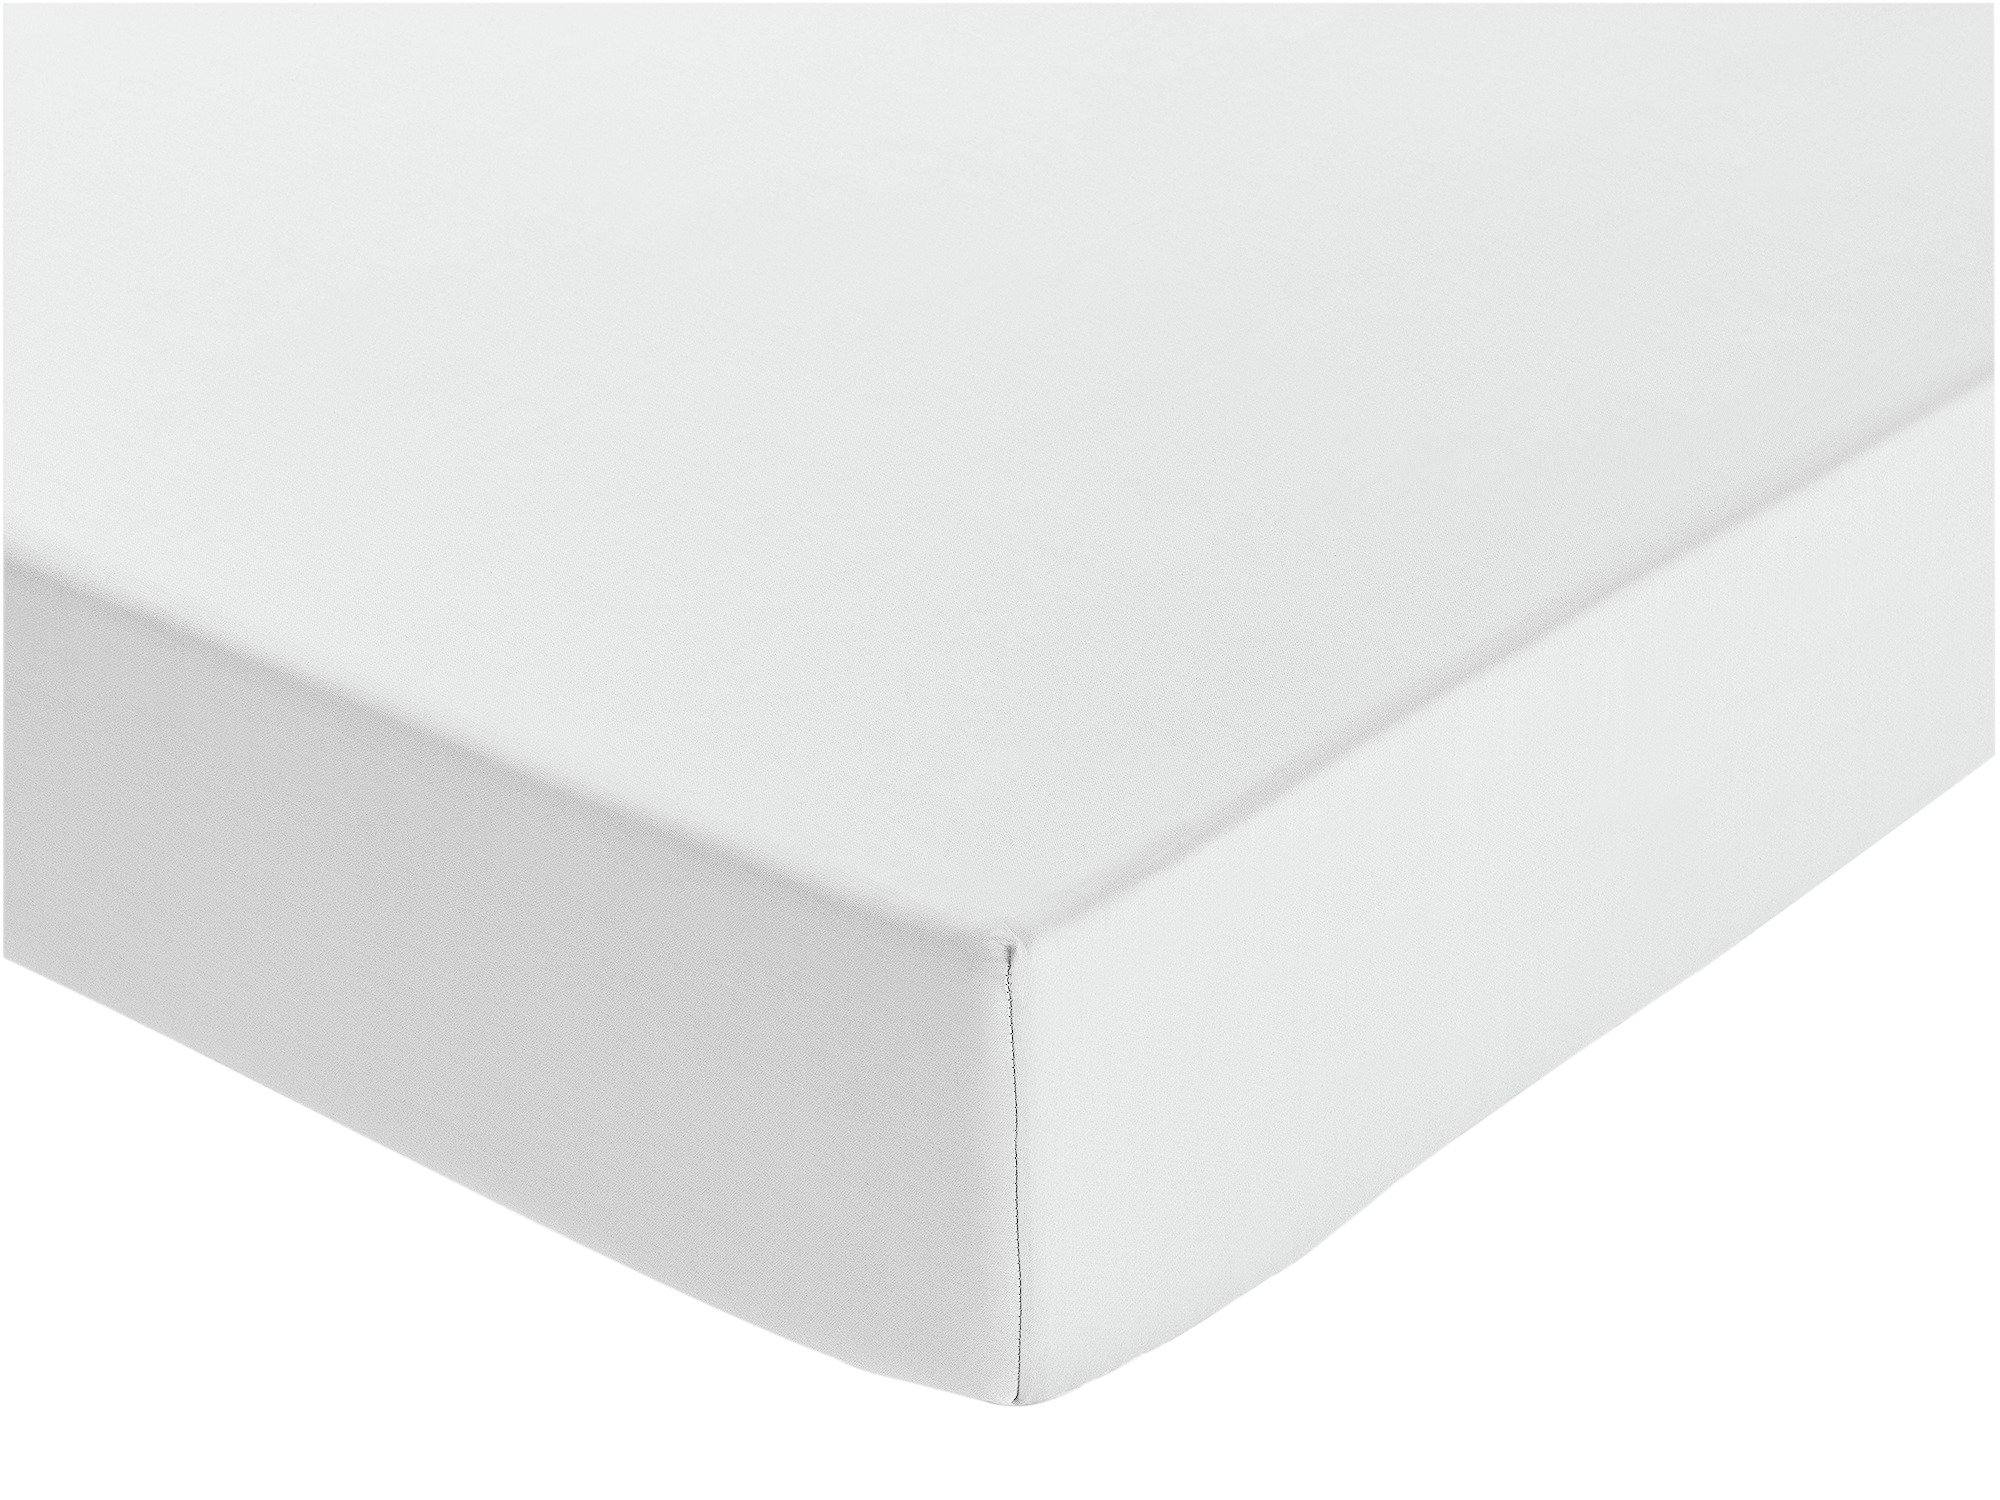 Argos Home White Extra Deep Fitted Sheet - Double